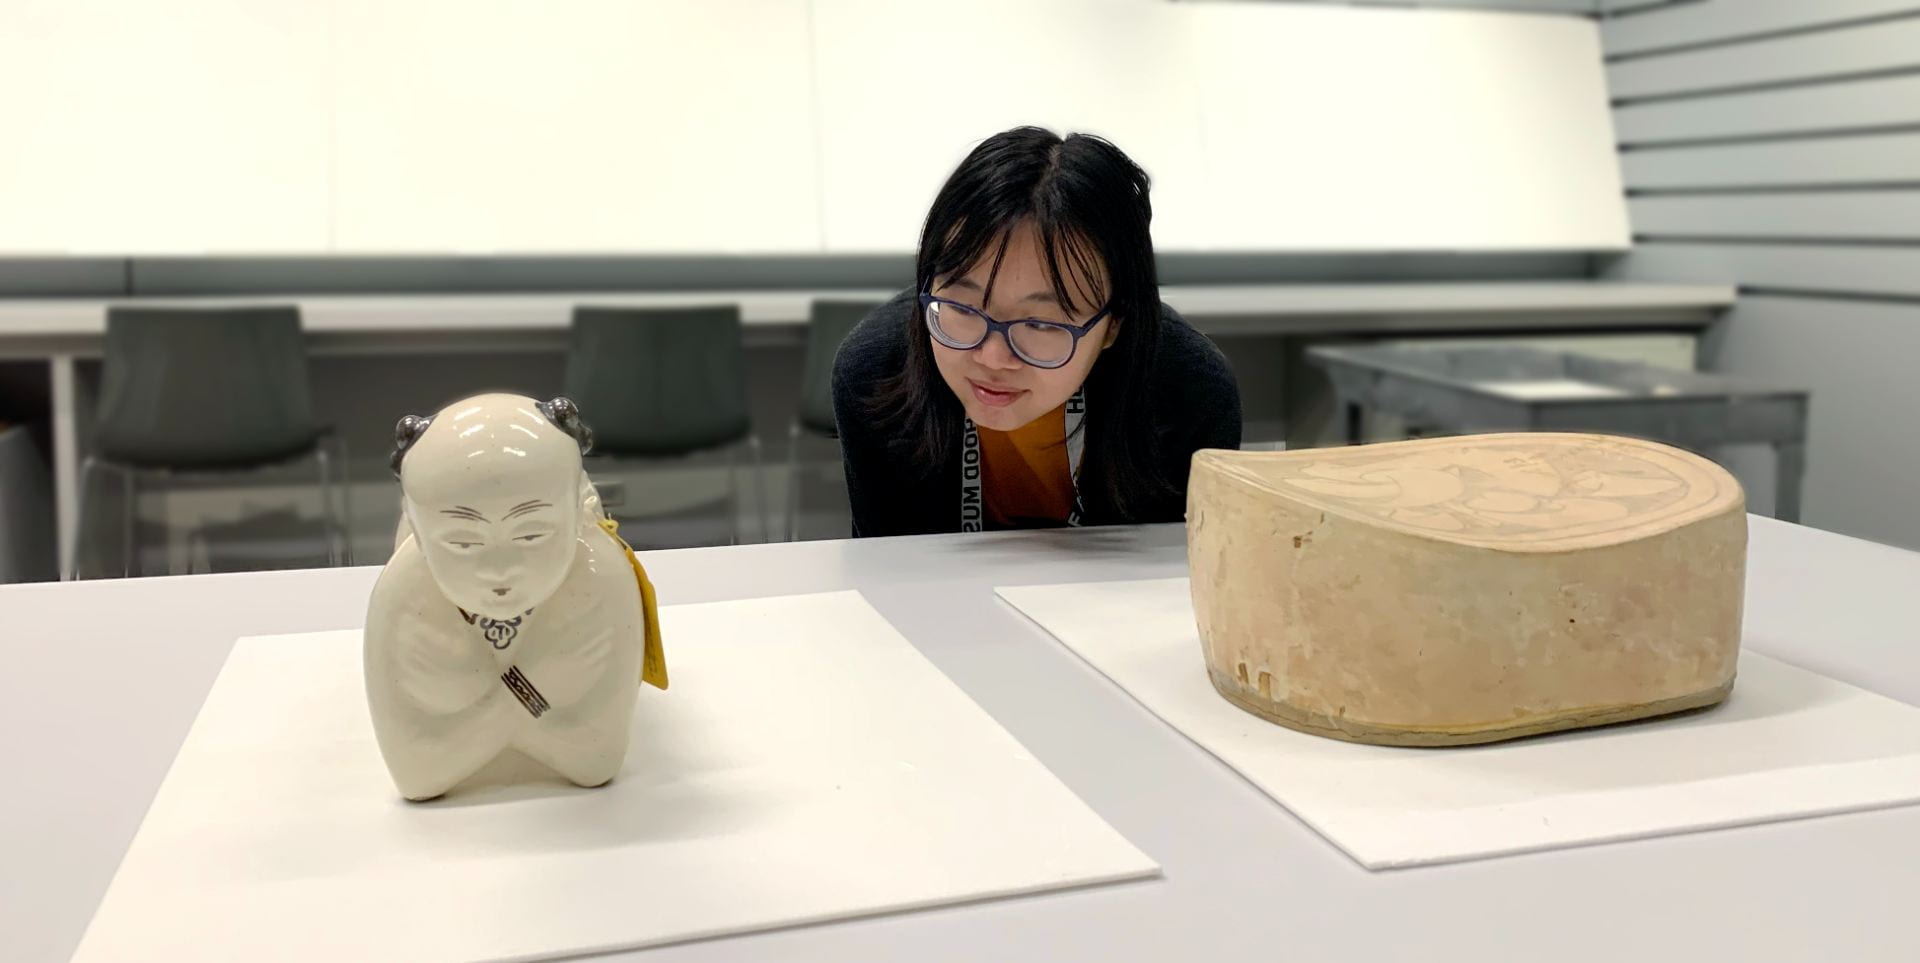 A young women leans down to take a closer look at two ancient Chinese ceramic pillows on a table.